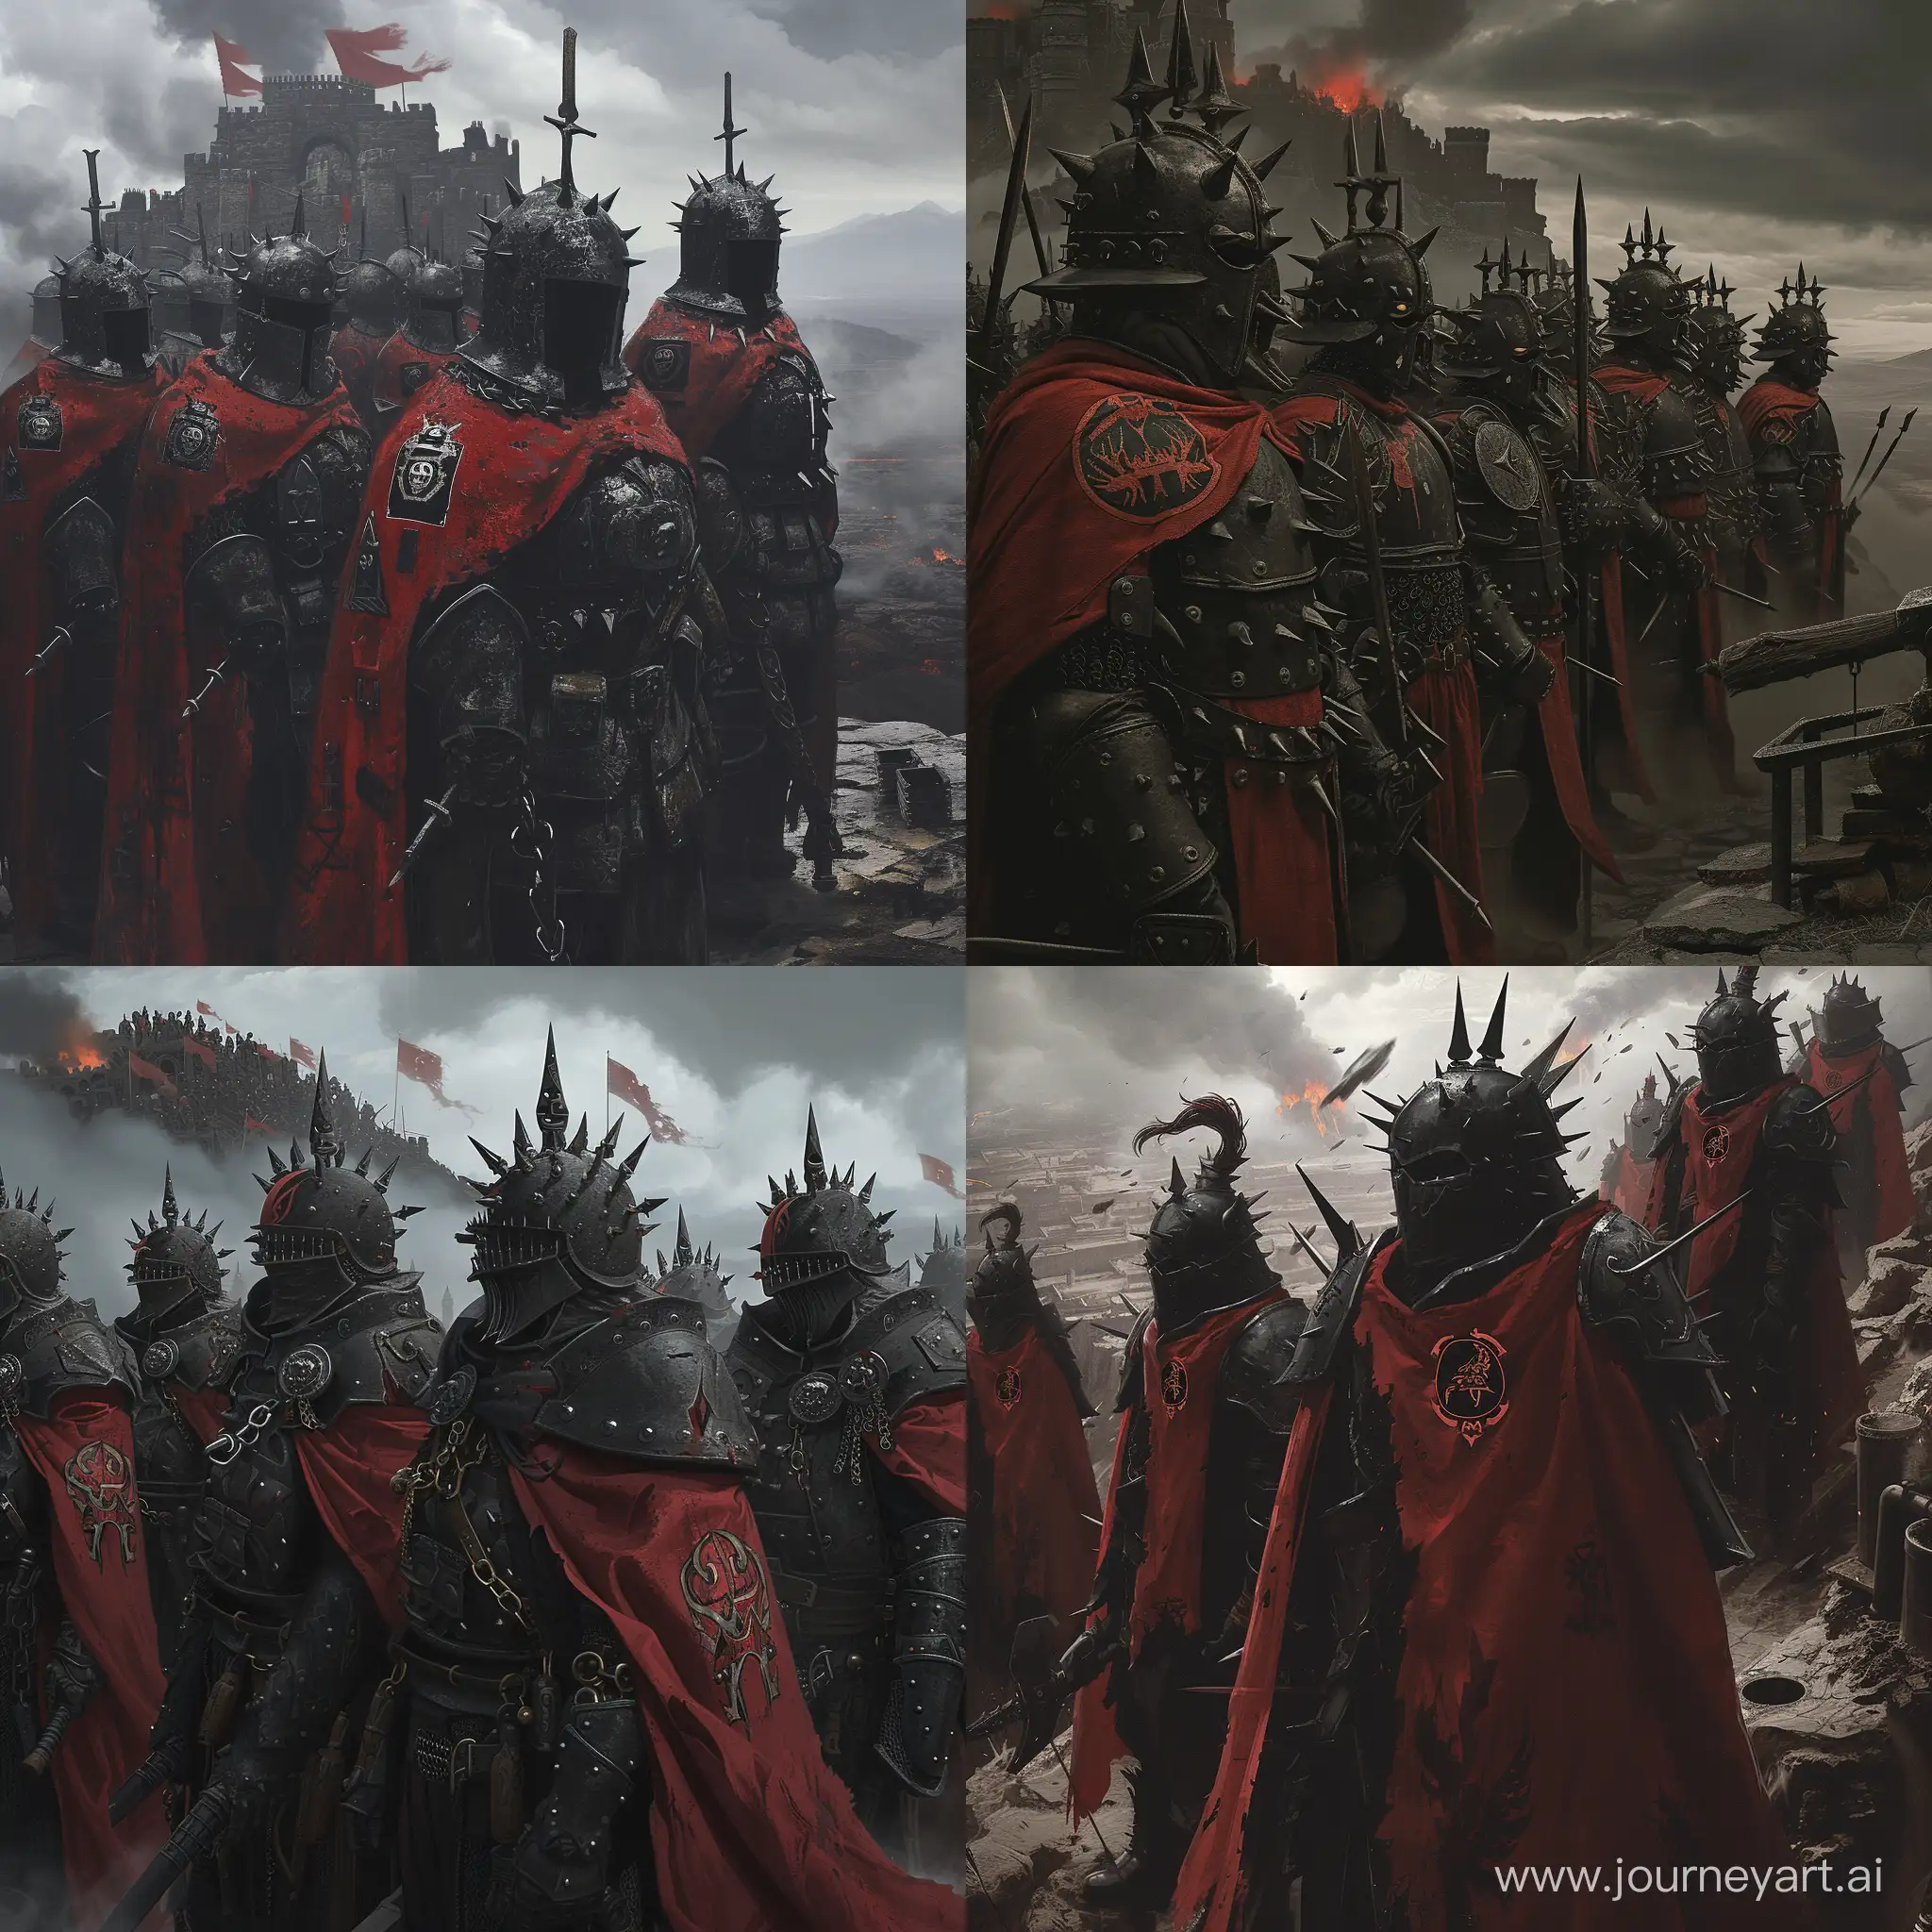 a bunch of Ironclad Legions wearing Heavy, blackened armor adorned with spikes and intimidating motifs. Crimson capes with the clan's symbol. Masks resembling menacing war helmets, in a fortress atop a desolate, volcanic mountain, surrounded by a sea of dark clouds. Furnaces and blacksmithing workshops echo with the sounds of forging ,1970's dark fantasy style, gritty, dark, vintage, ultra detailed